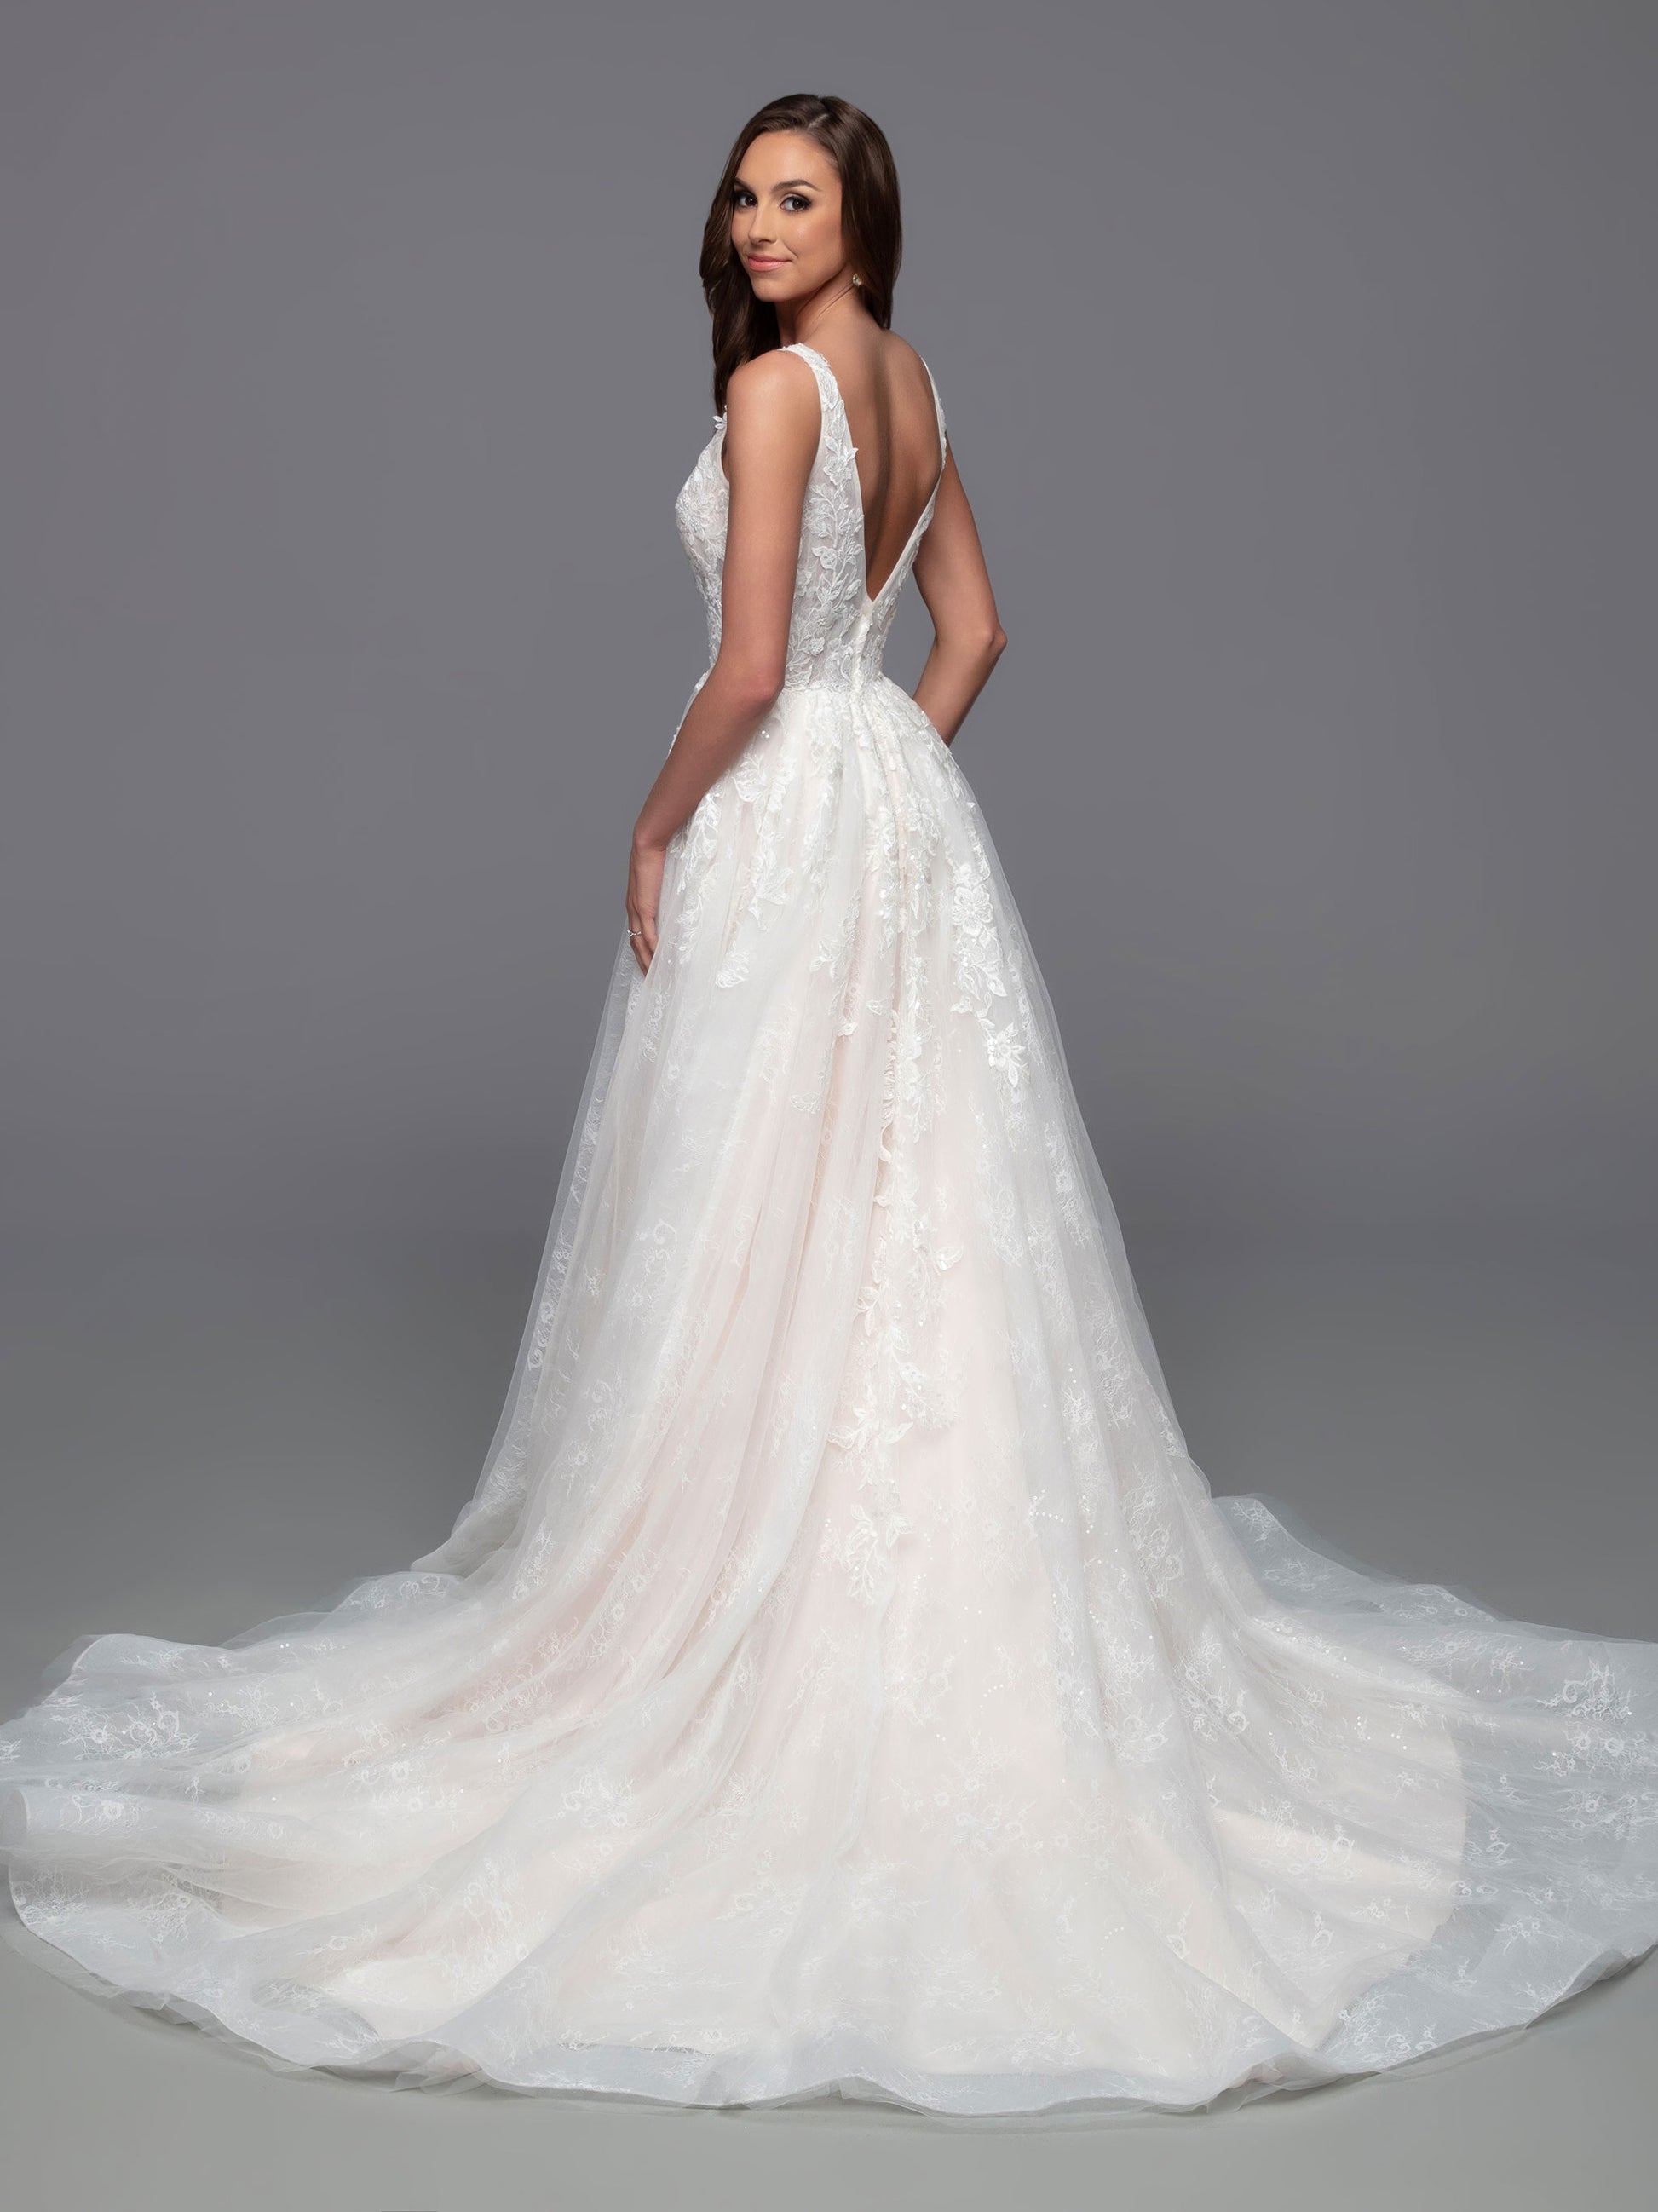 The Davinci Bridal 50821 is a stunning choice for a wedding dress, featuring a fitted V-neckline, sheer bodice, and a gorgeous a-line maxi skirt with a chapel length train and delicate sequin detailing. The daring slit skirt adds a daring touch for a timeless yet modern look.  Sizes: 2-20  Colors: Ivory/Ivory, Ivory/Light Blush